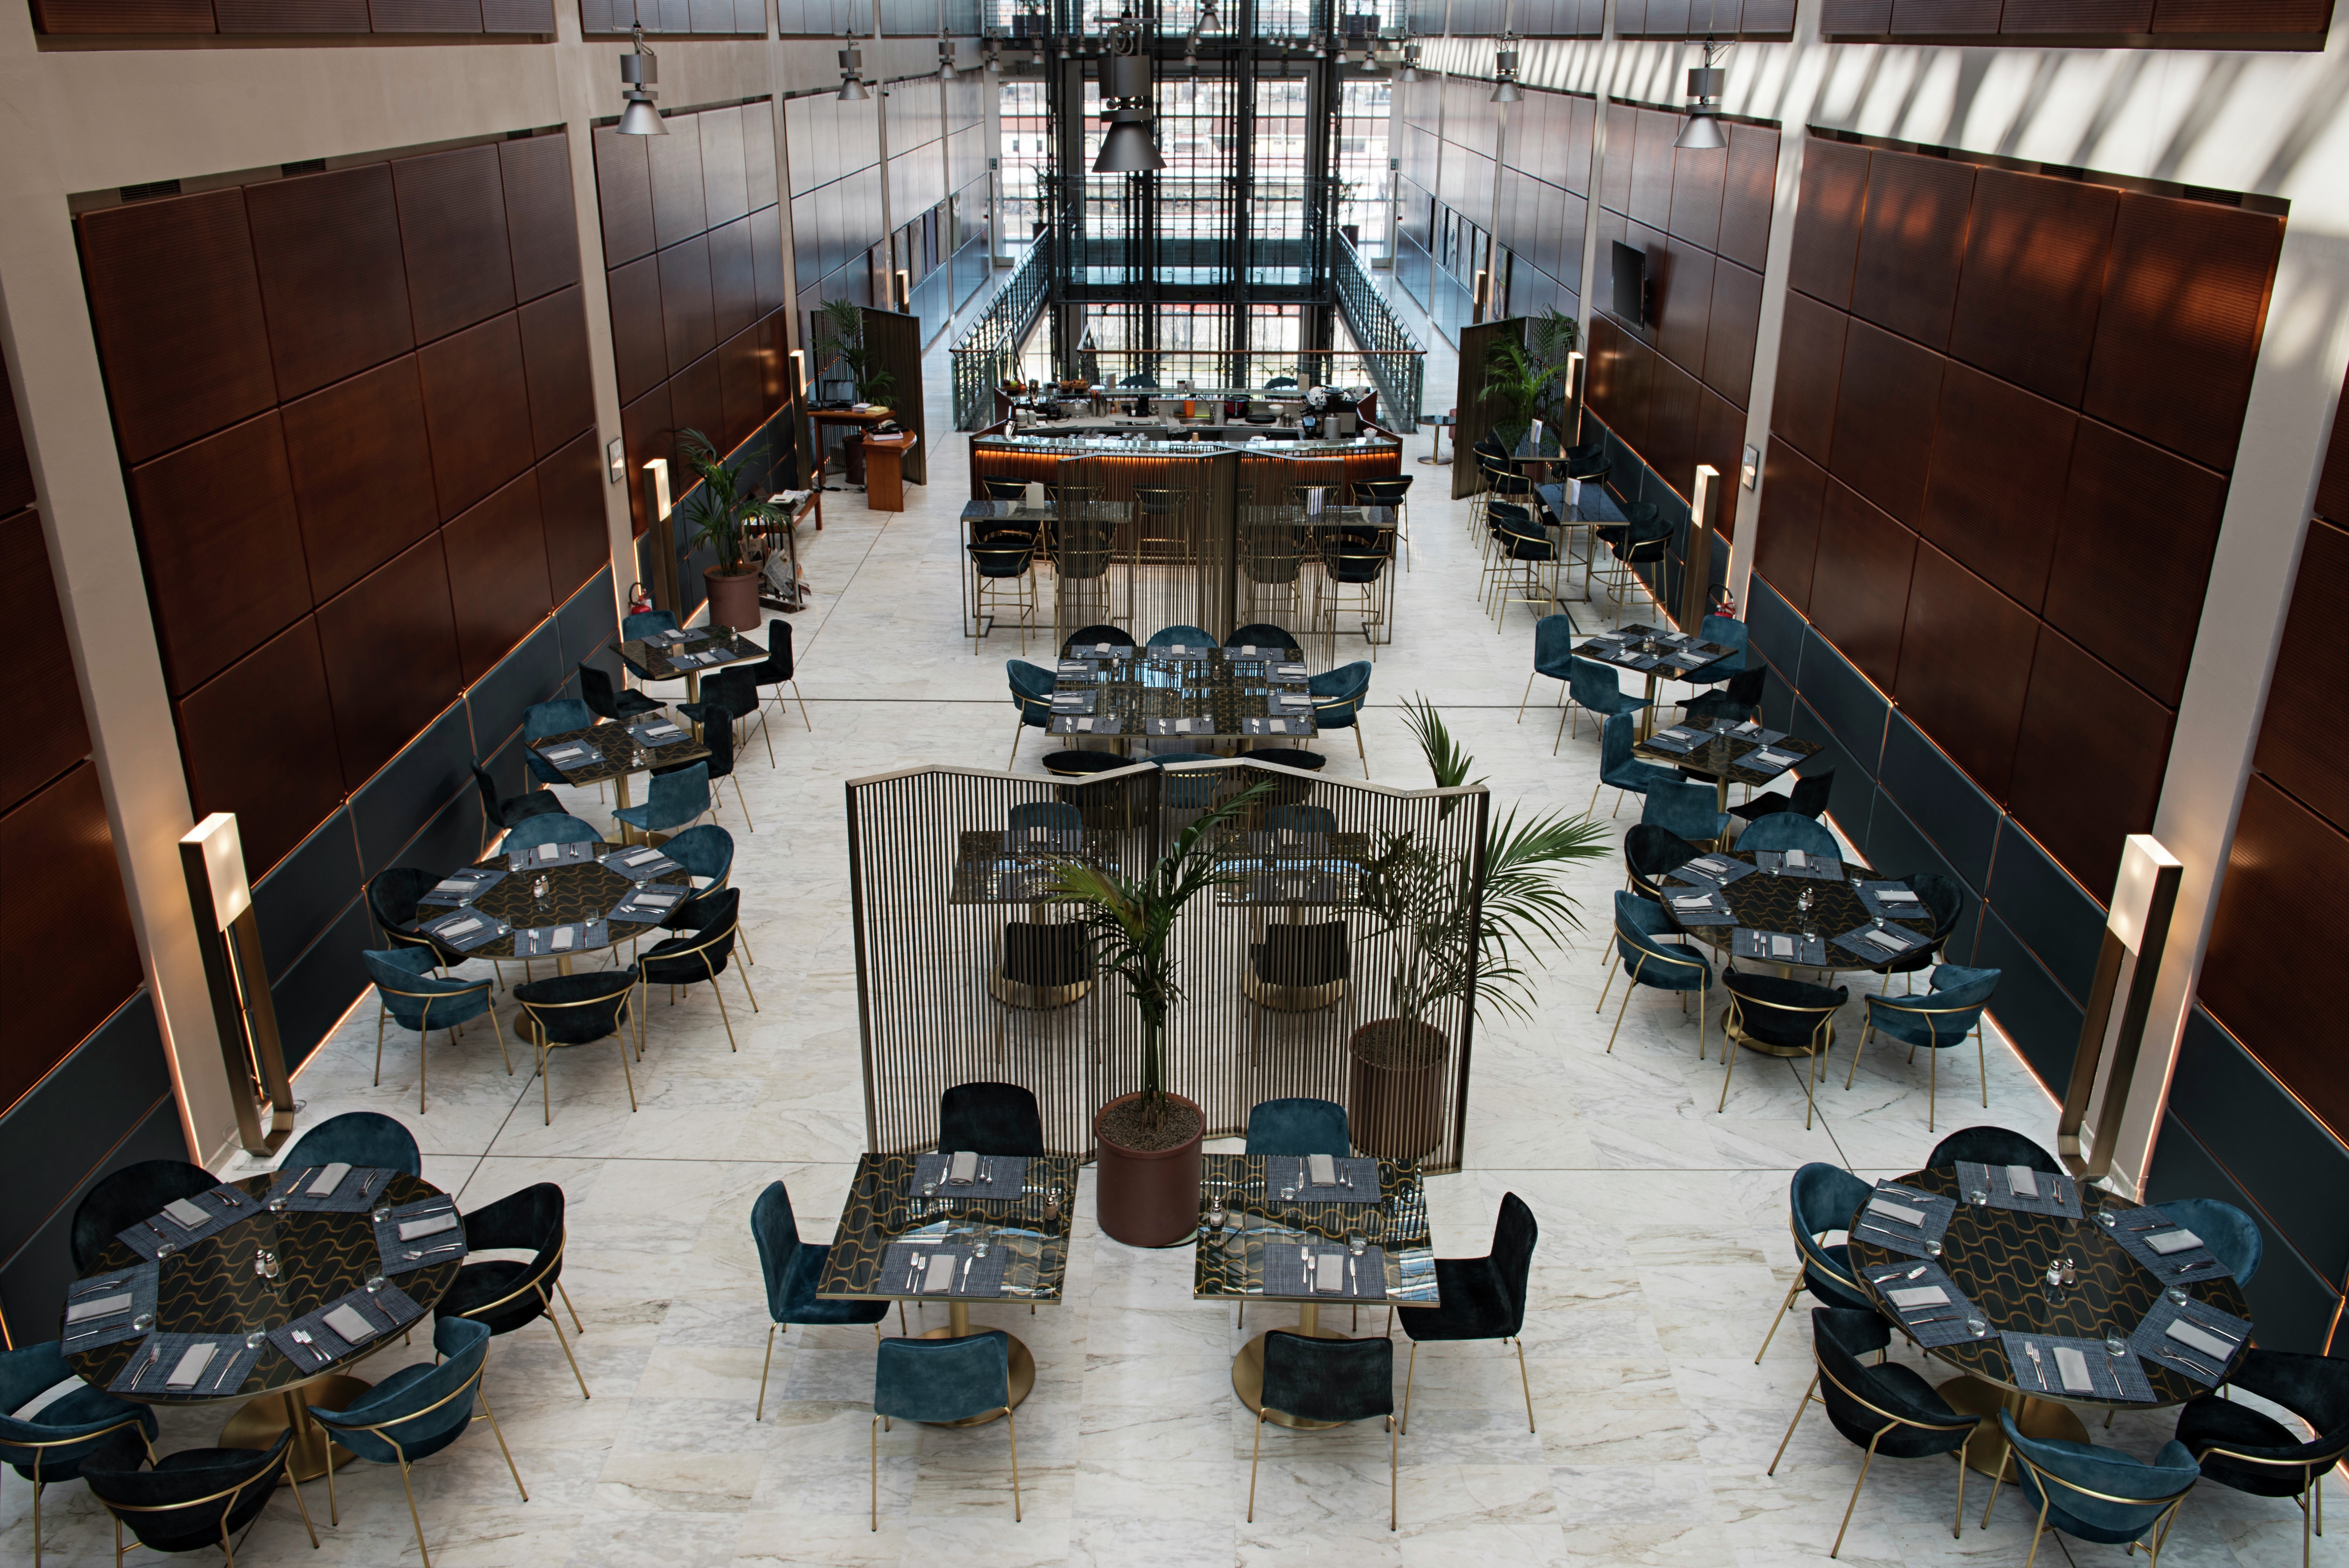 Overhead View of Restaurant Dining Area